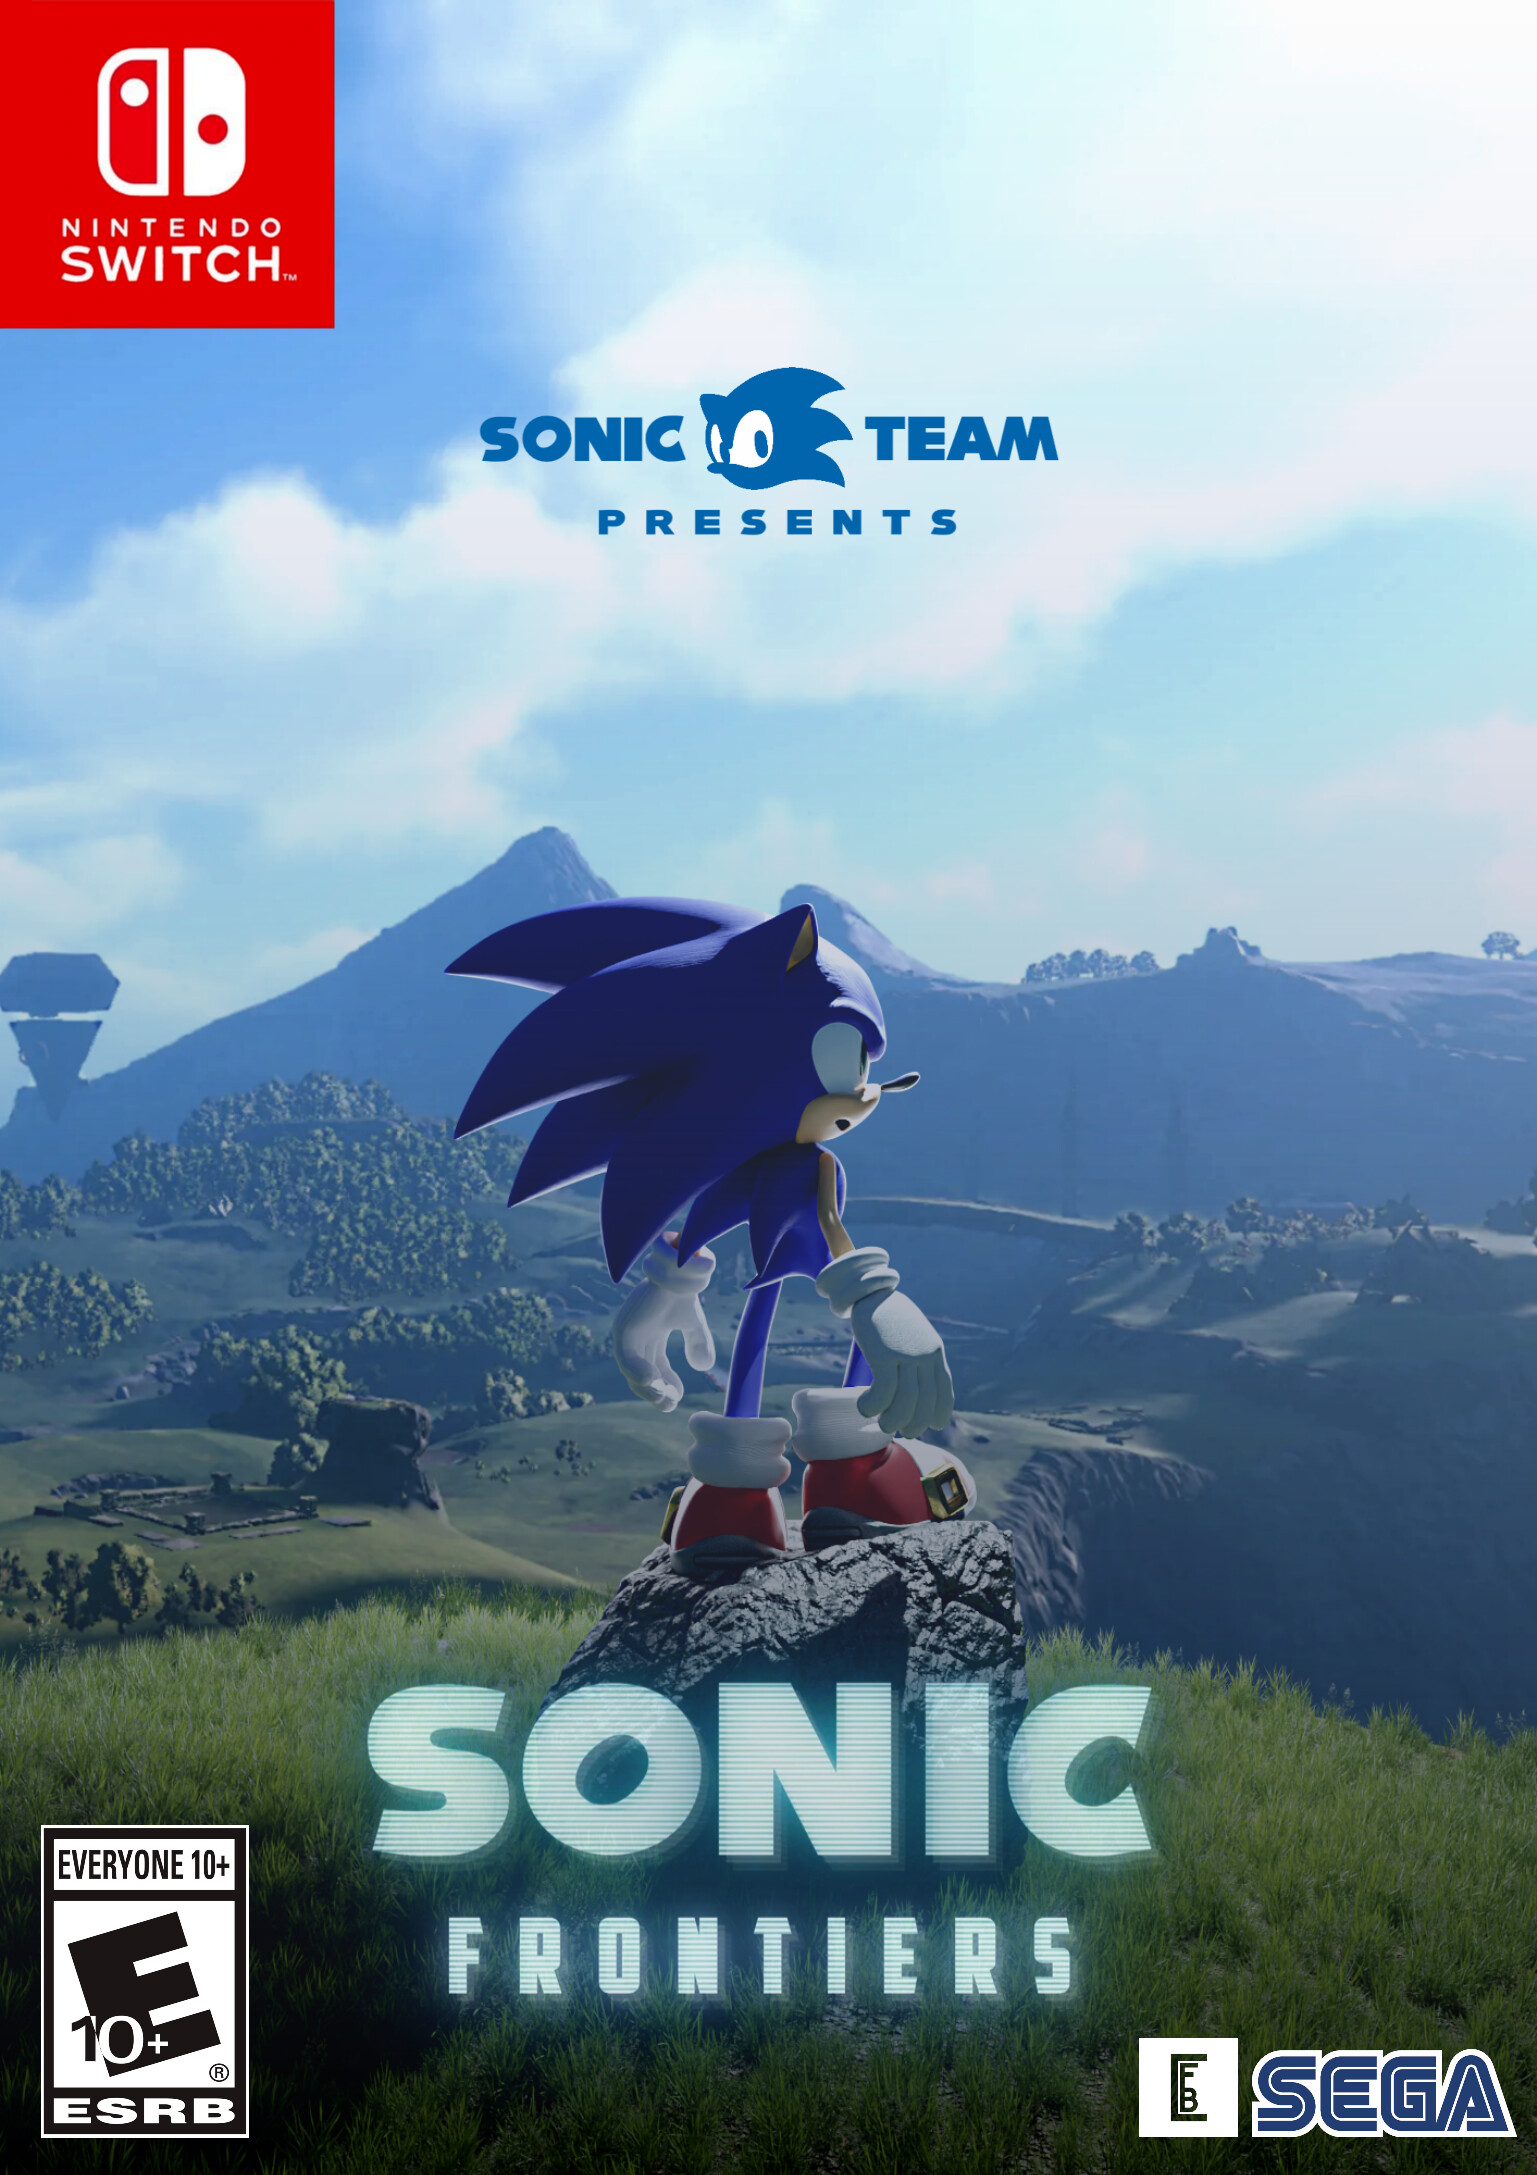 Sonic the Hedgehog 2 - Box Art - Finished Projects - Blender